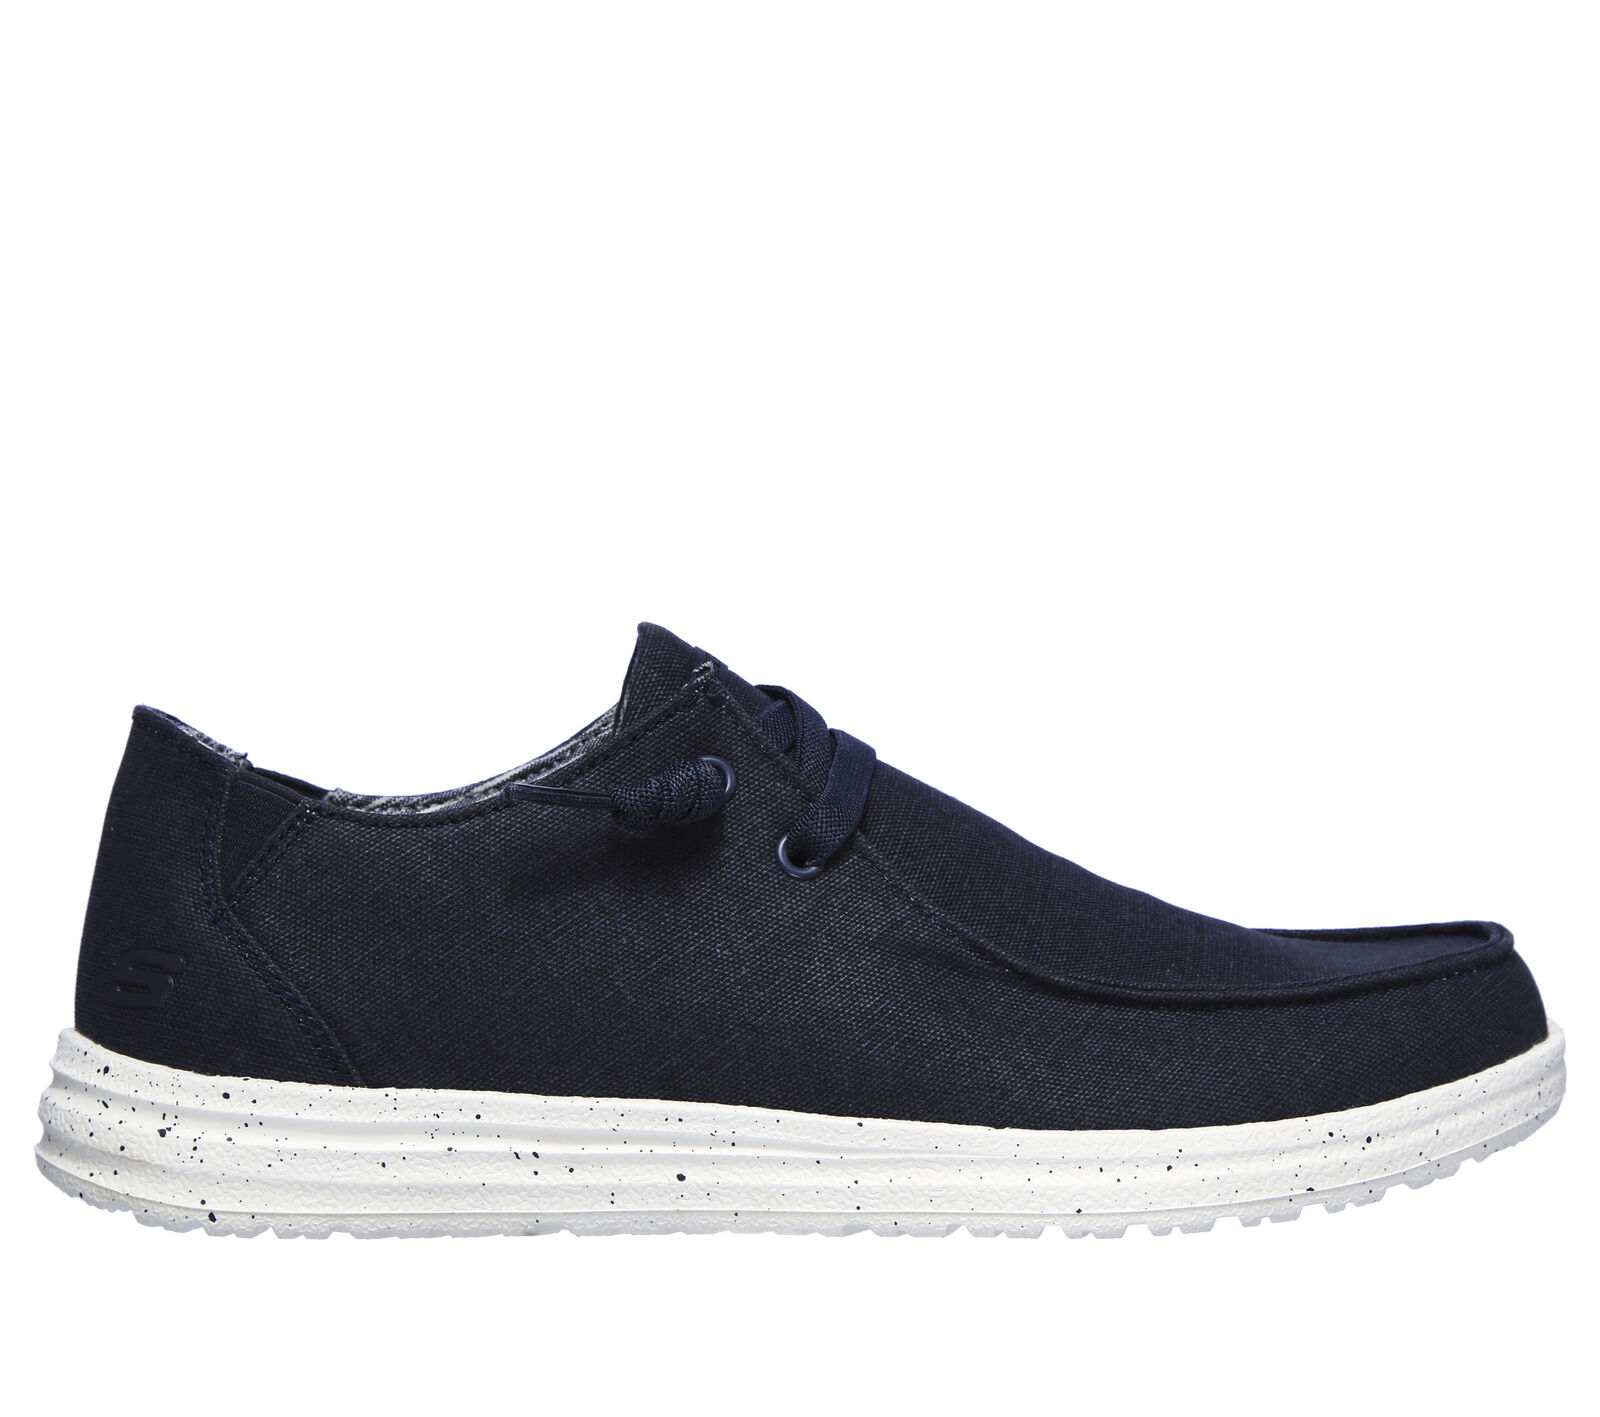 Shop the Relaxed Fit: Melson - Chad | SKECHERS